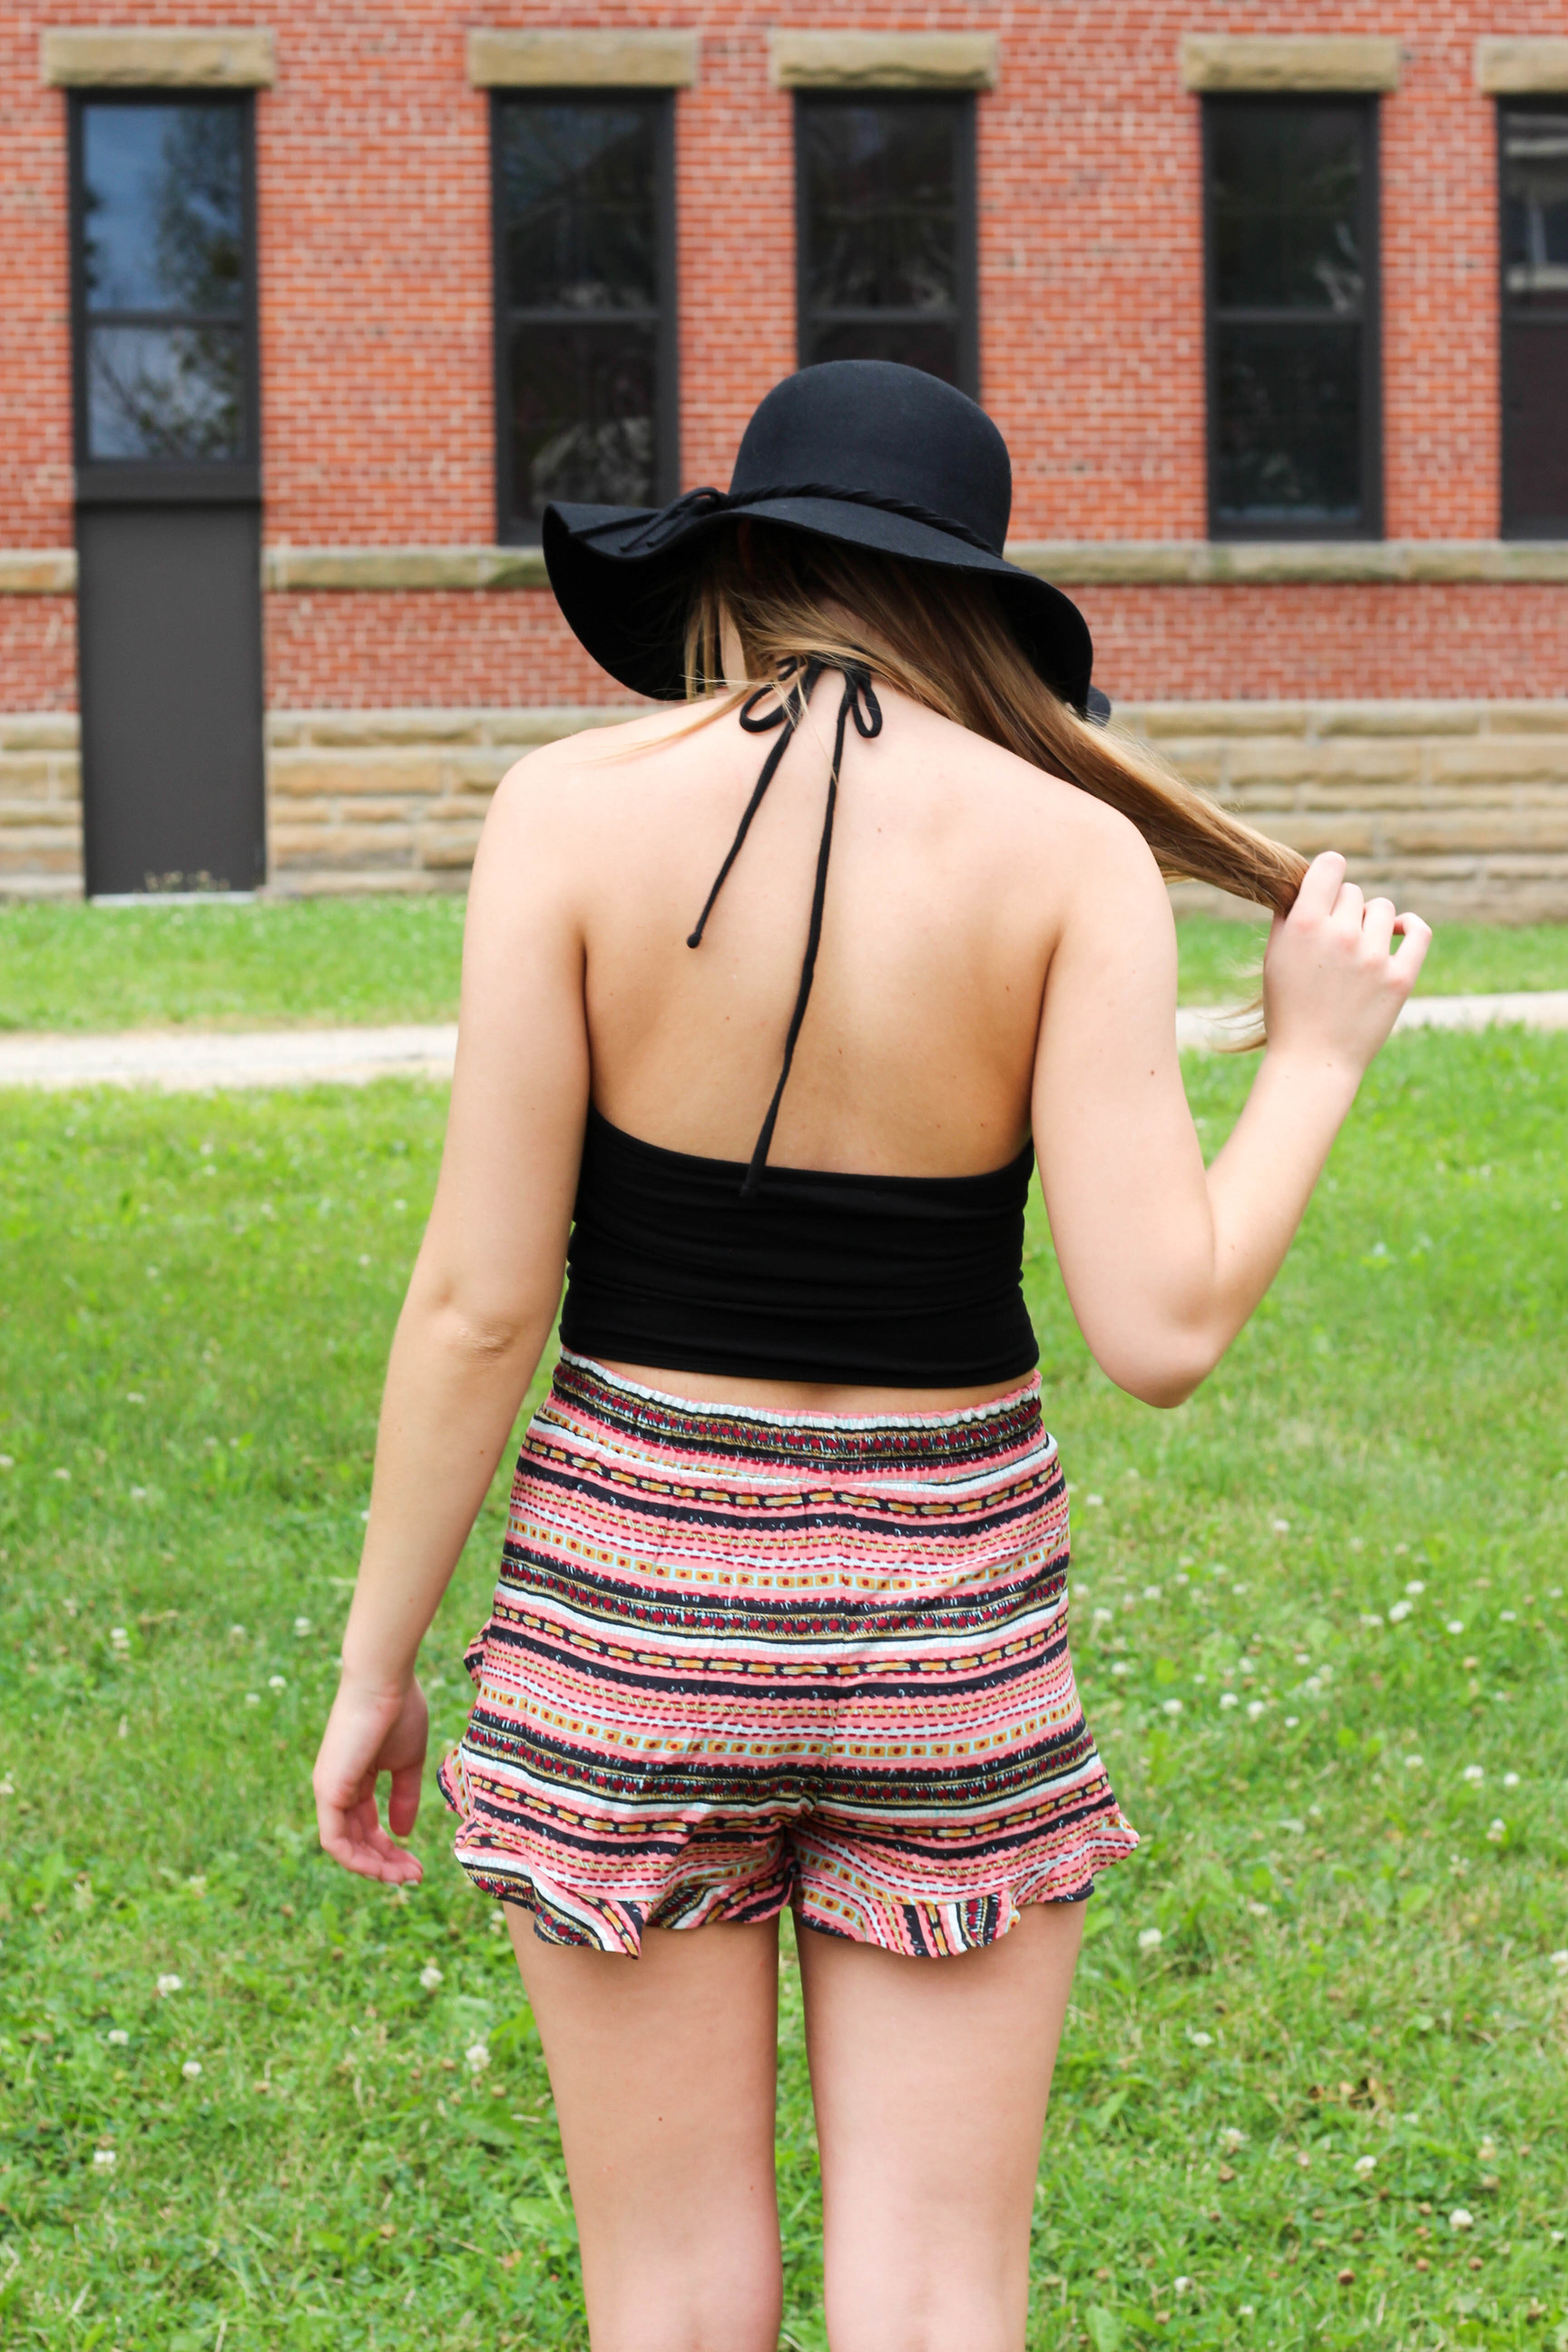 Black hat, floppy hat, brandy Melville top, boho outfit by lauren lindmark on daily dose of charm